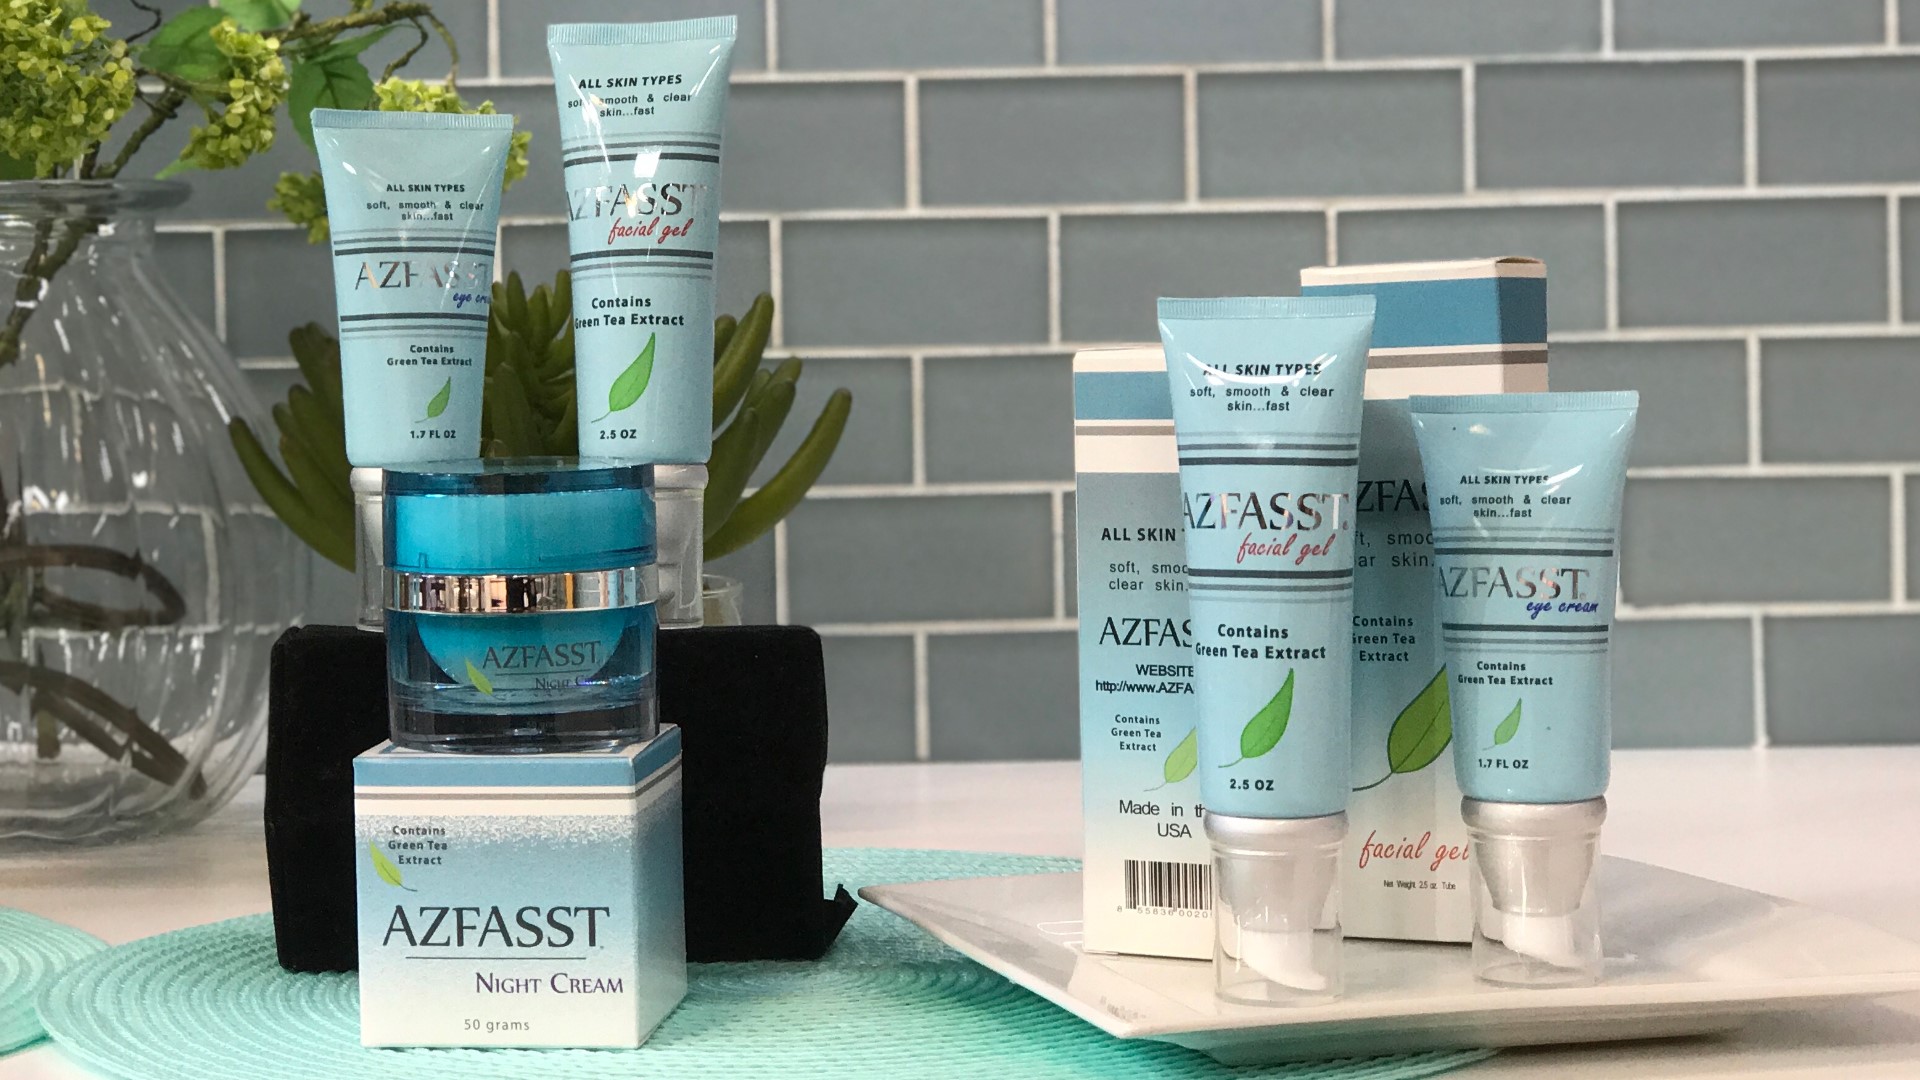 Skin changes drastically as we age, so different skin care products are available to target a number of issues. Sponsored by Azfasst.